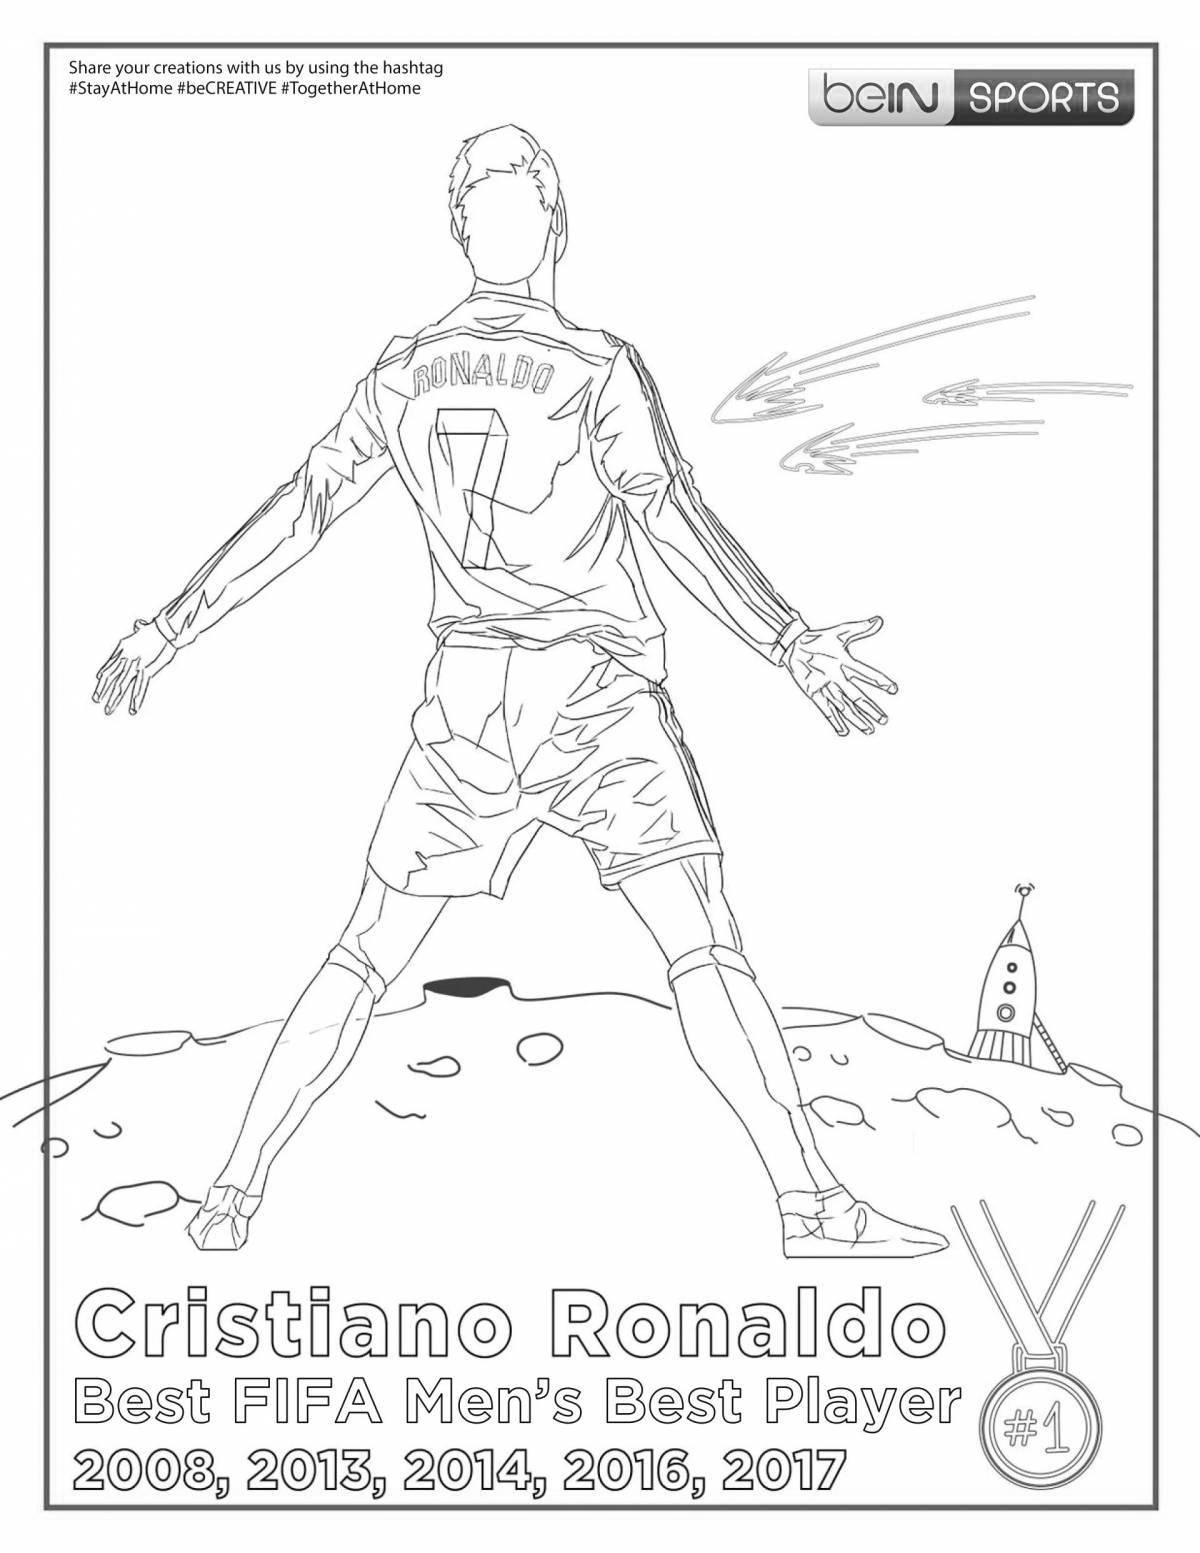 Charming ronaldo coloring book for kids